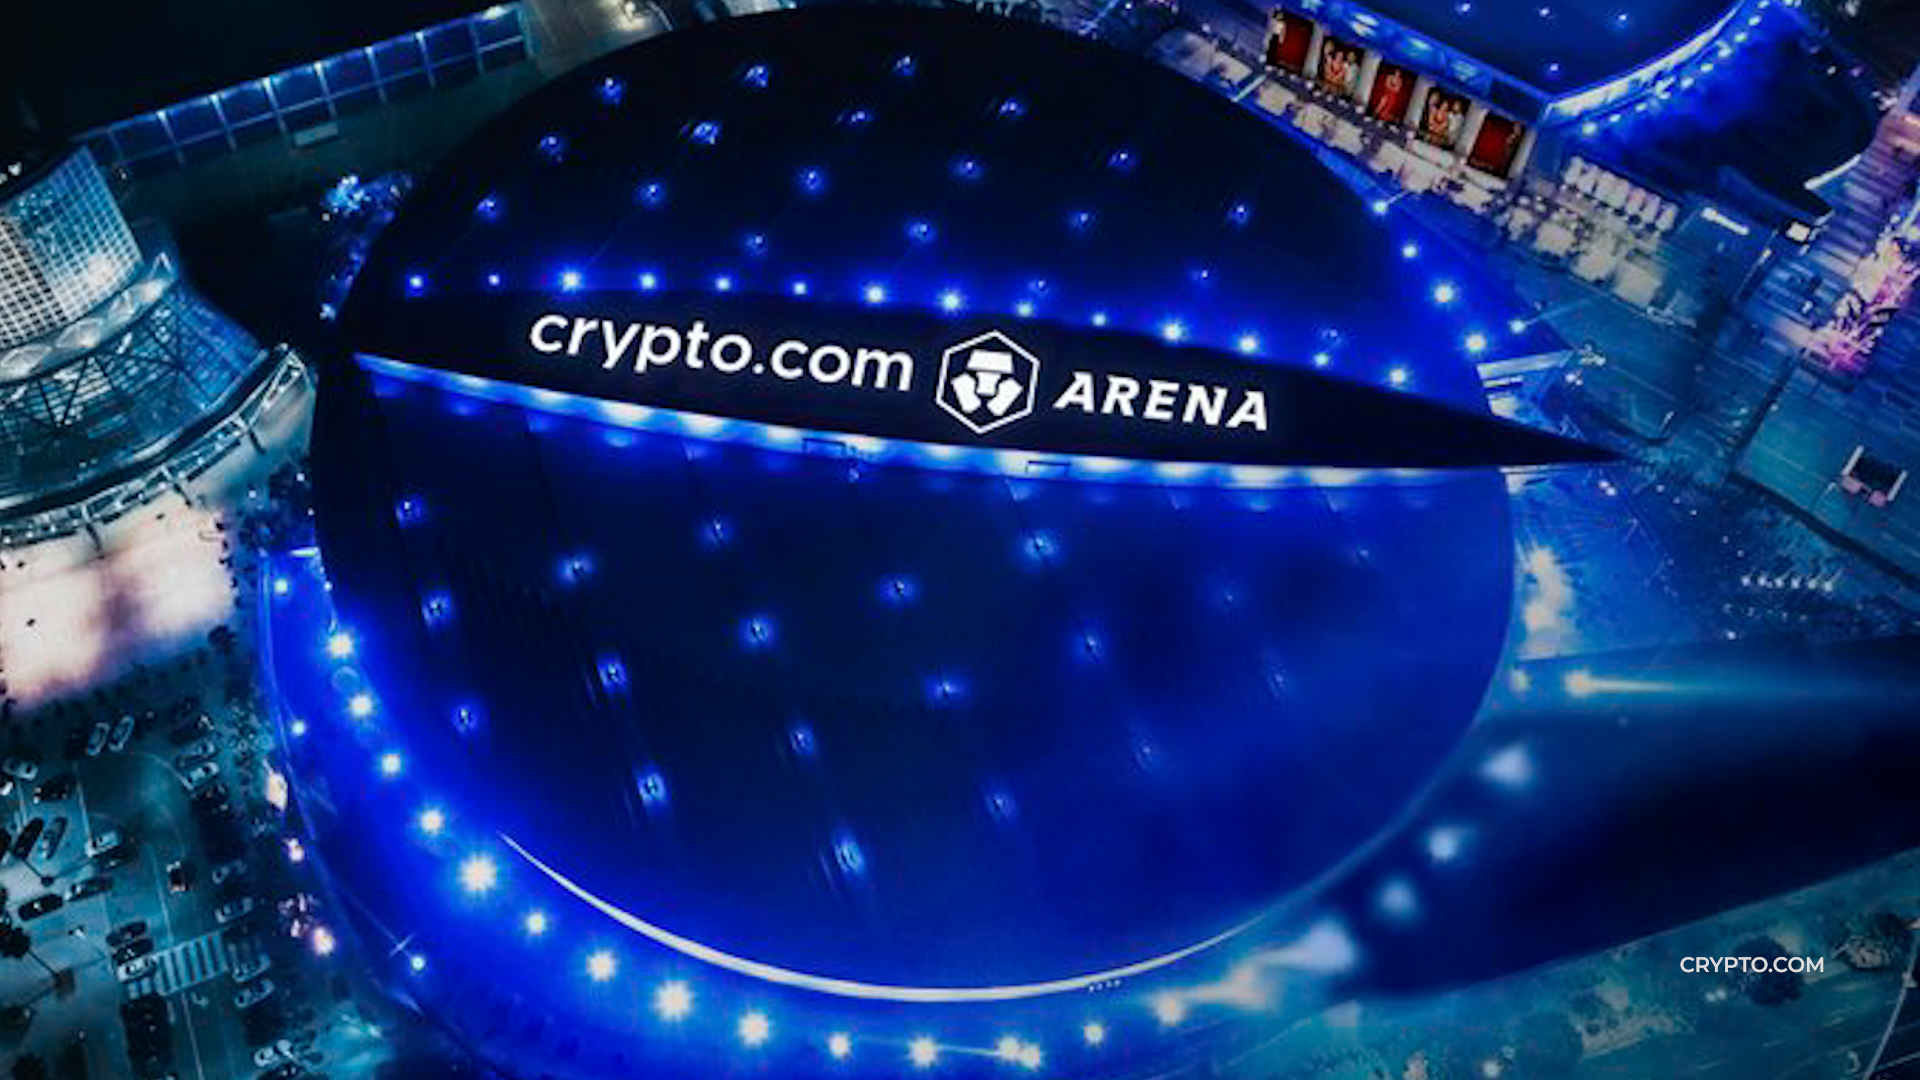 Staples Center will change its name to Crypto.com Arena